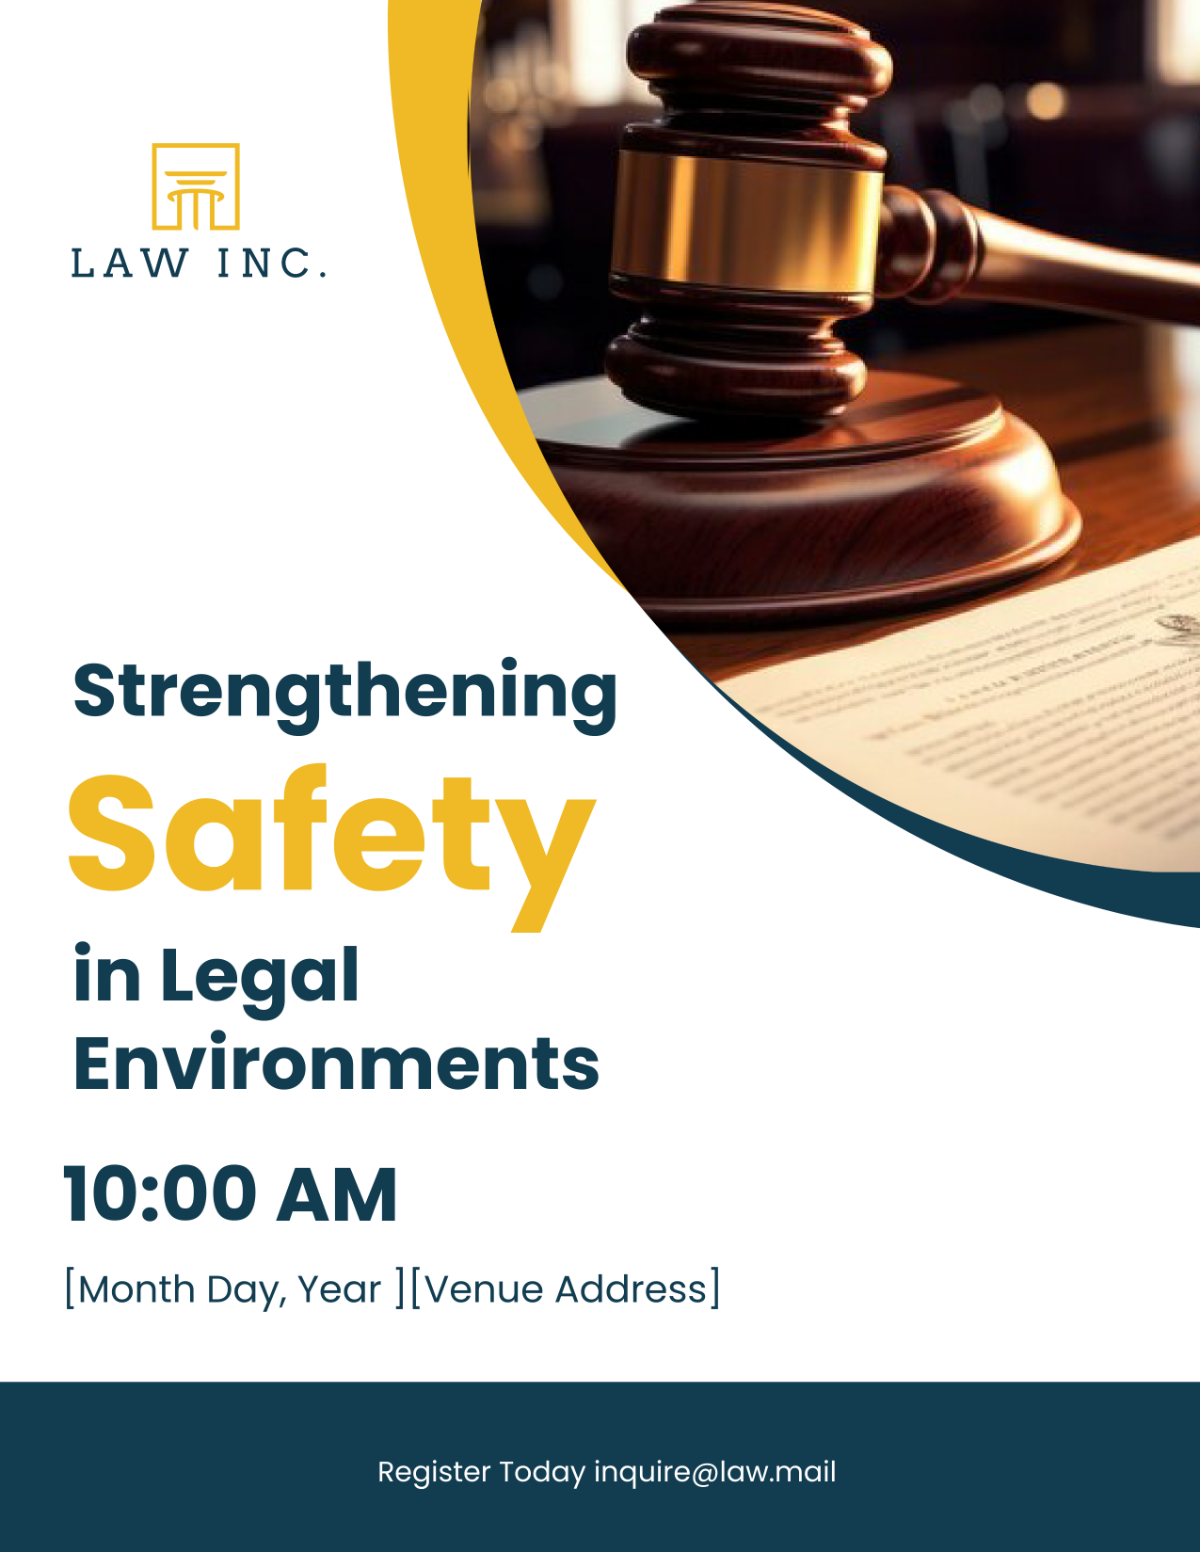 Law Firm Safety Flyer Template